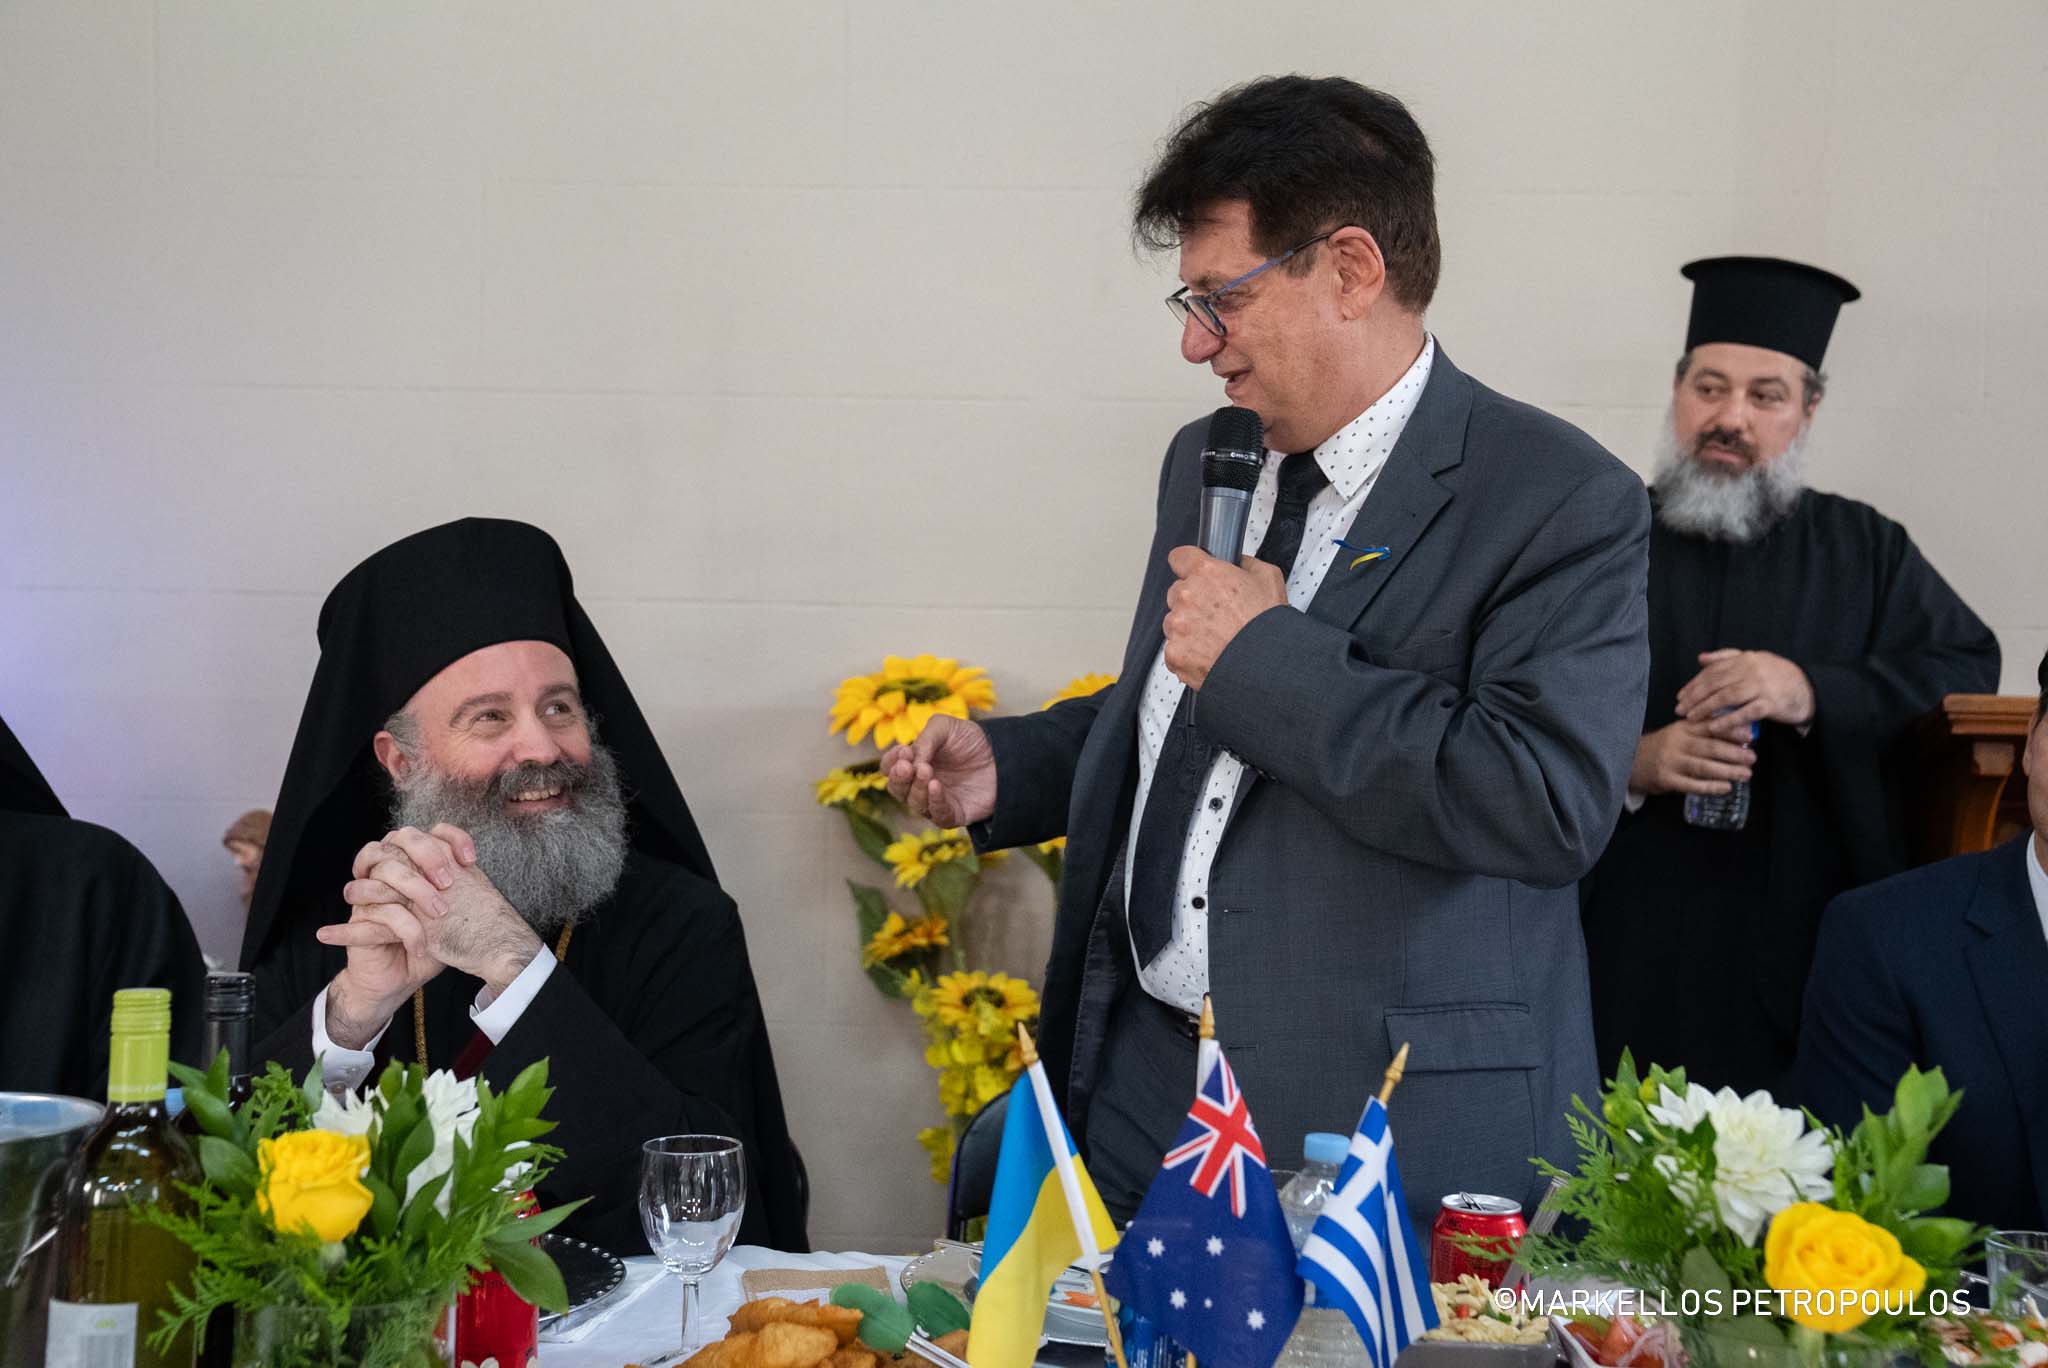 Memorial service for the victims of the Holodomor famine in Sydney by the Archbishop of Australia